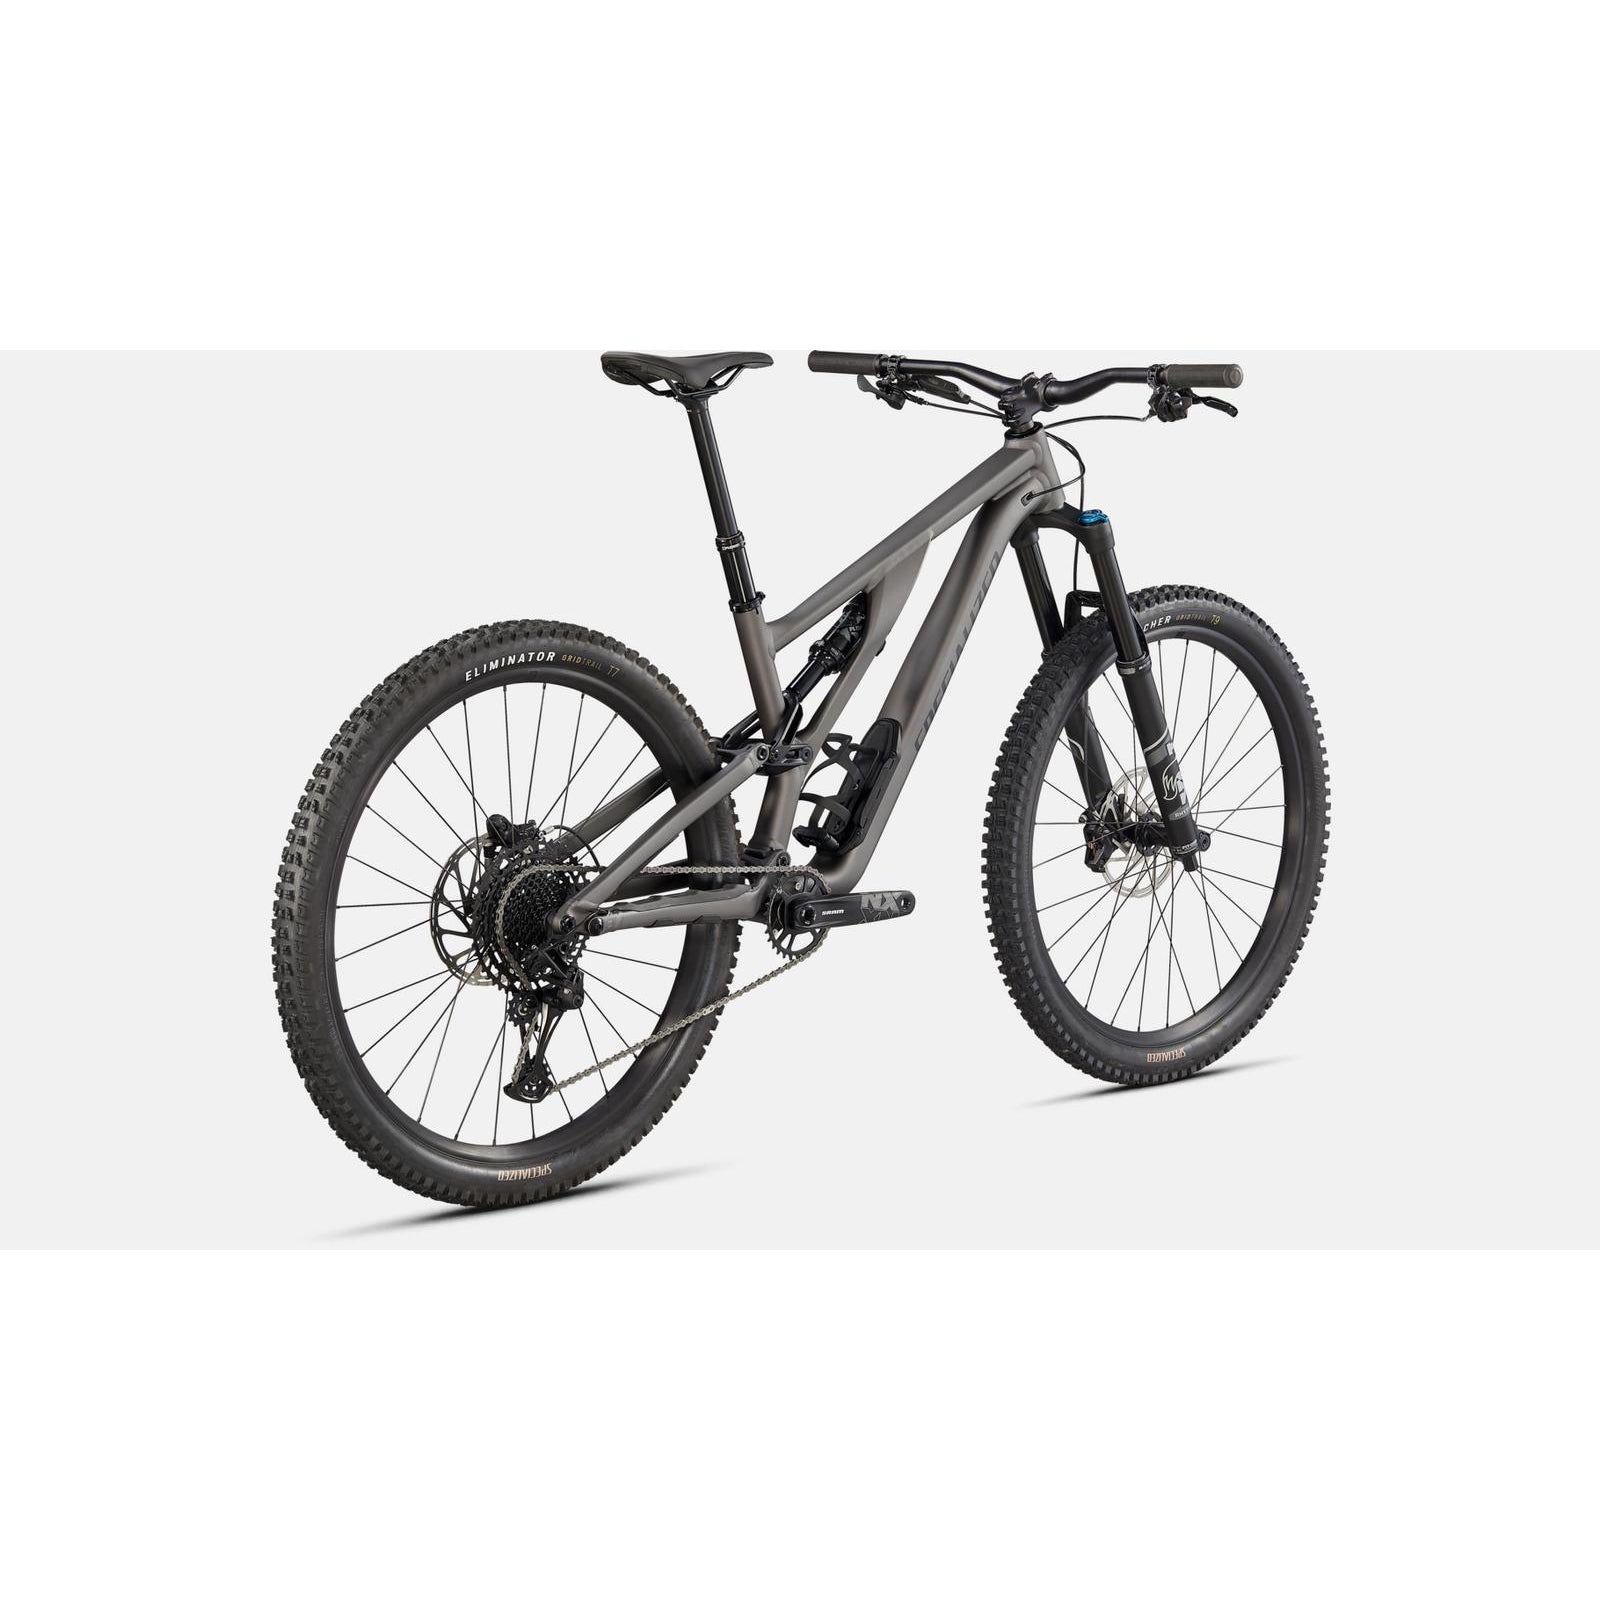 Specialized StumpJumper Evo Comp Alloy Full Suspension 29" Mountain Bike - Bikes - Bicycle Warehouse